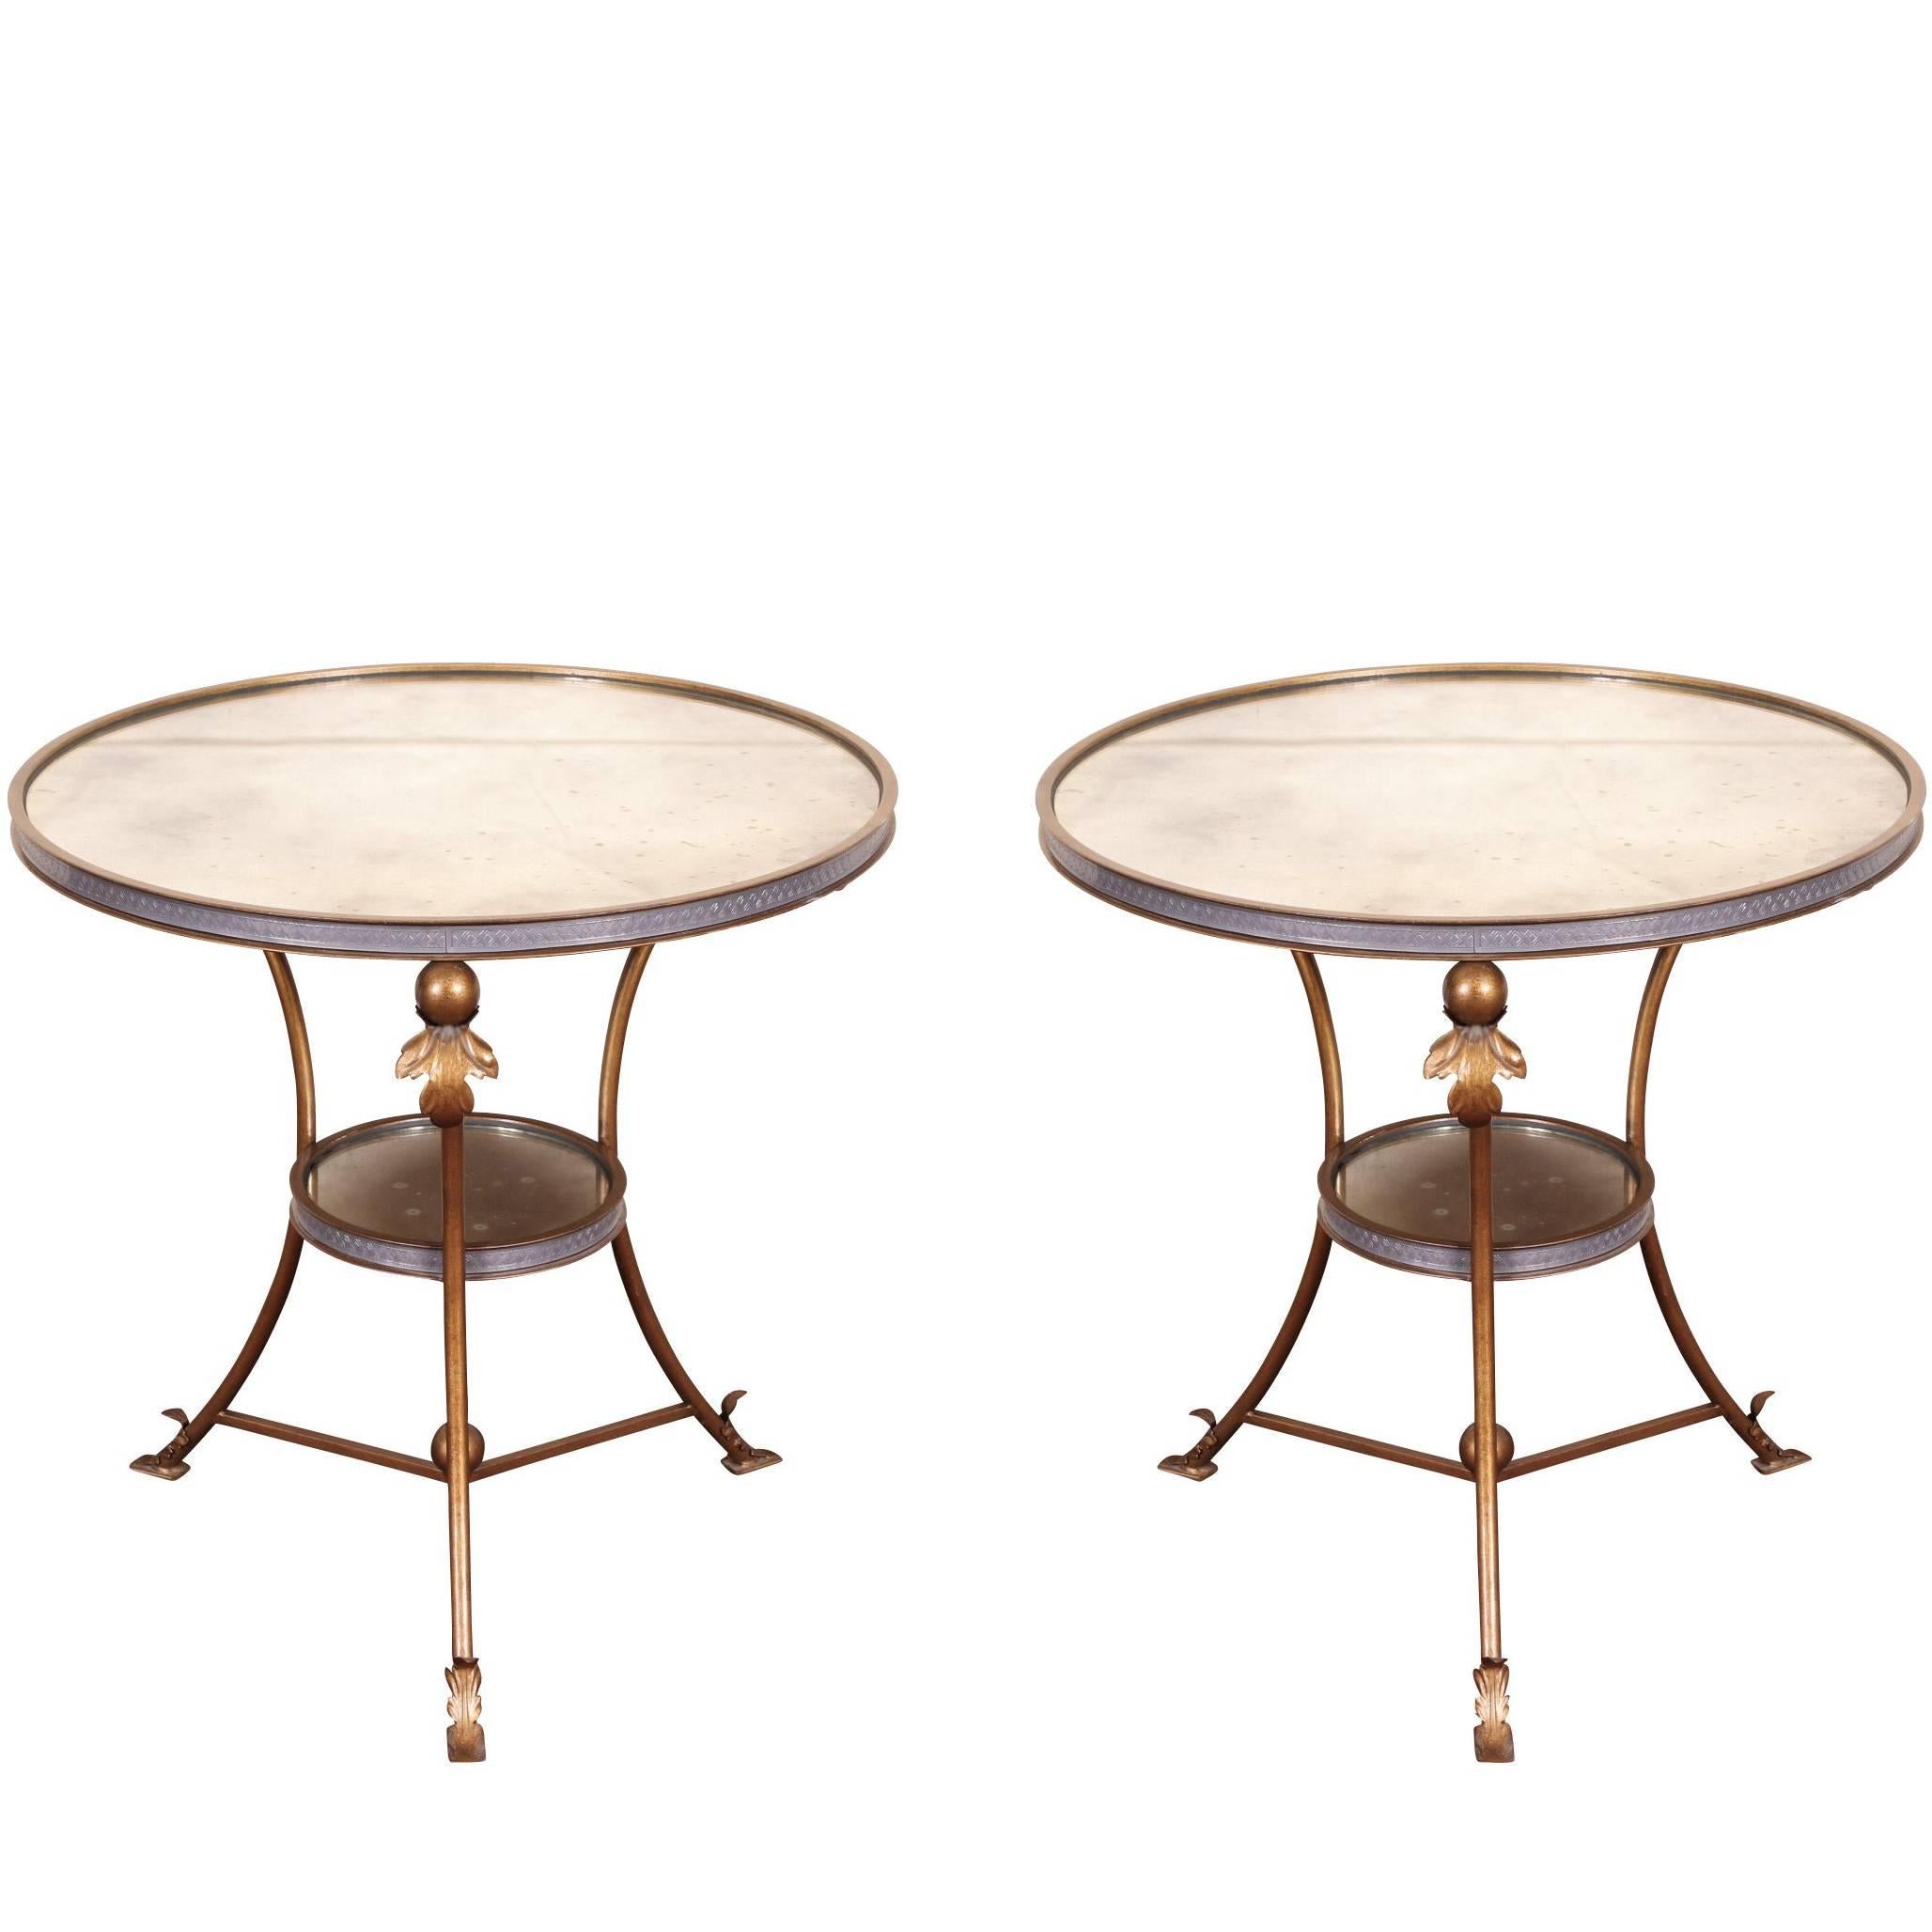 Pair of Mirrored Top Round Side Tables